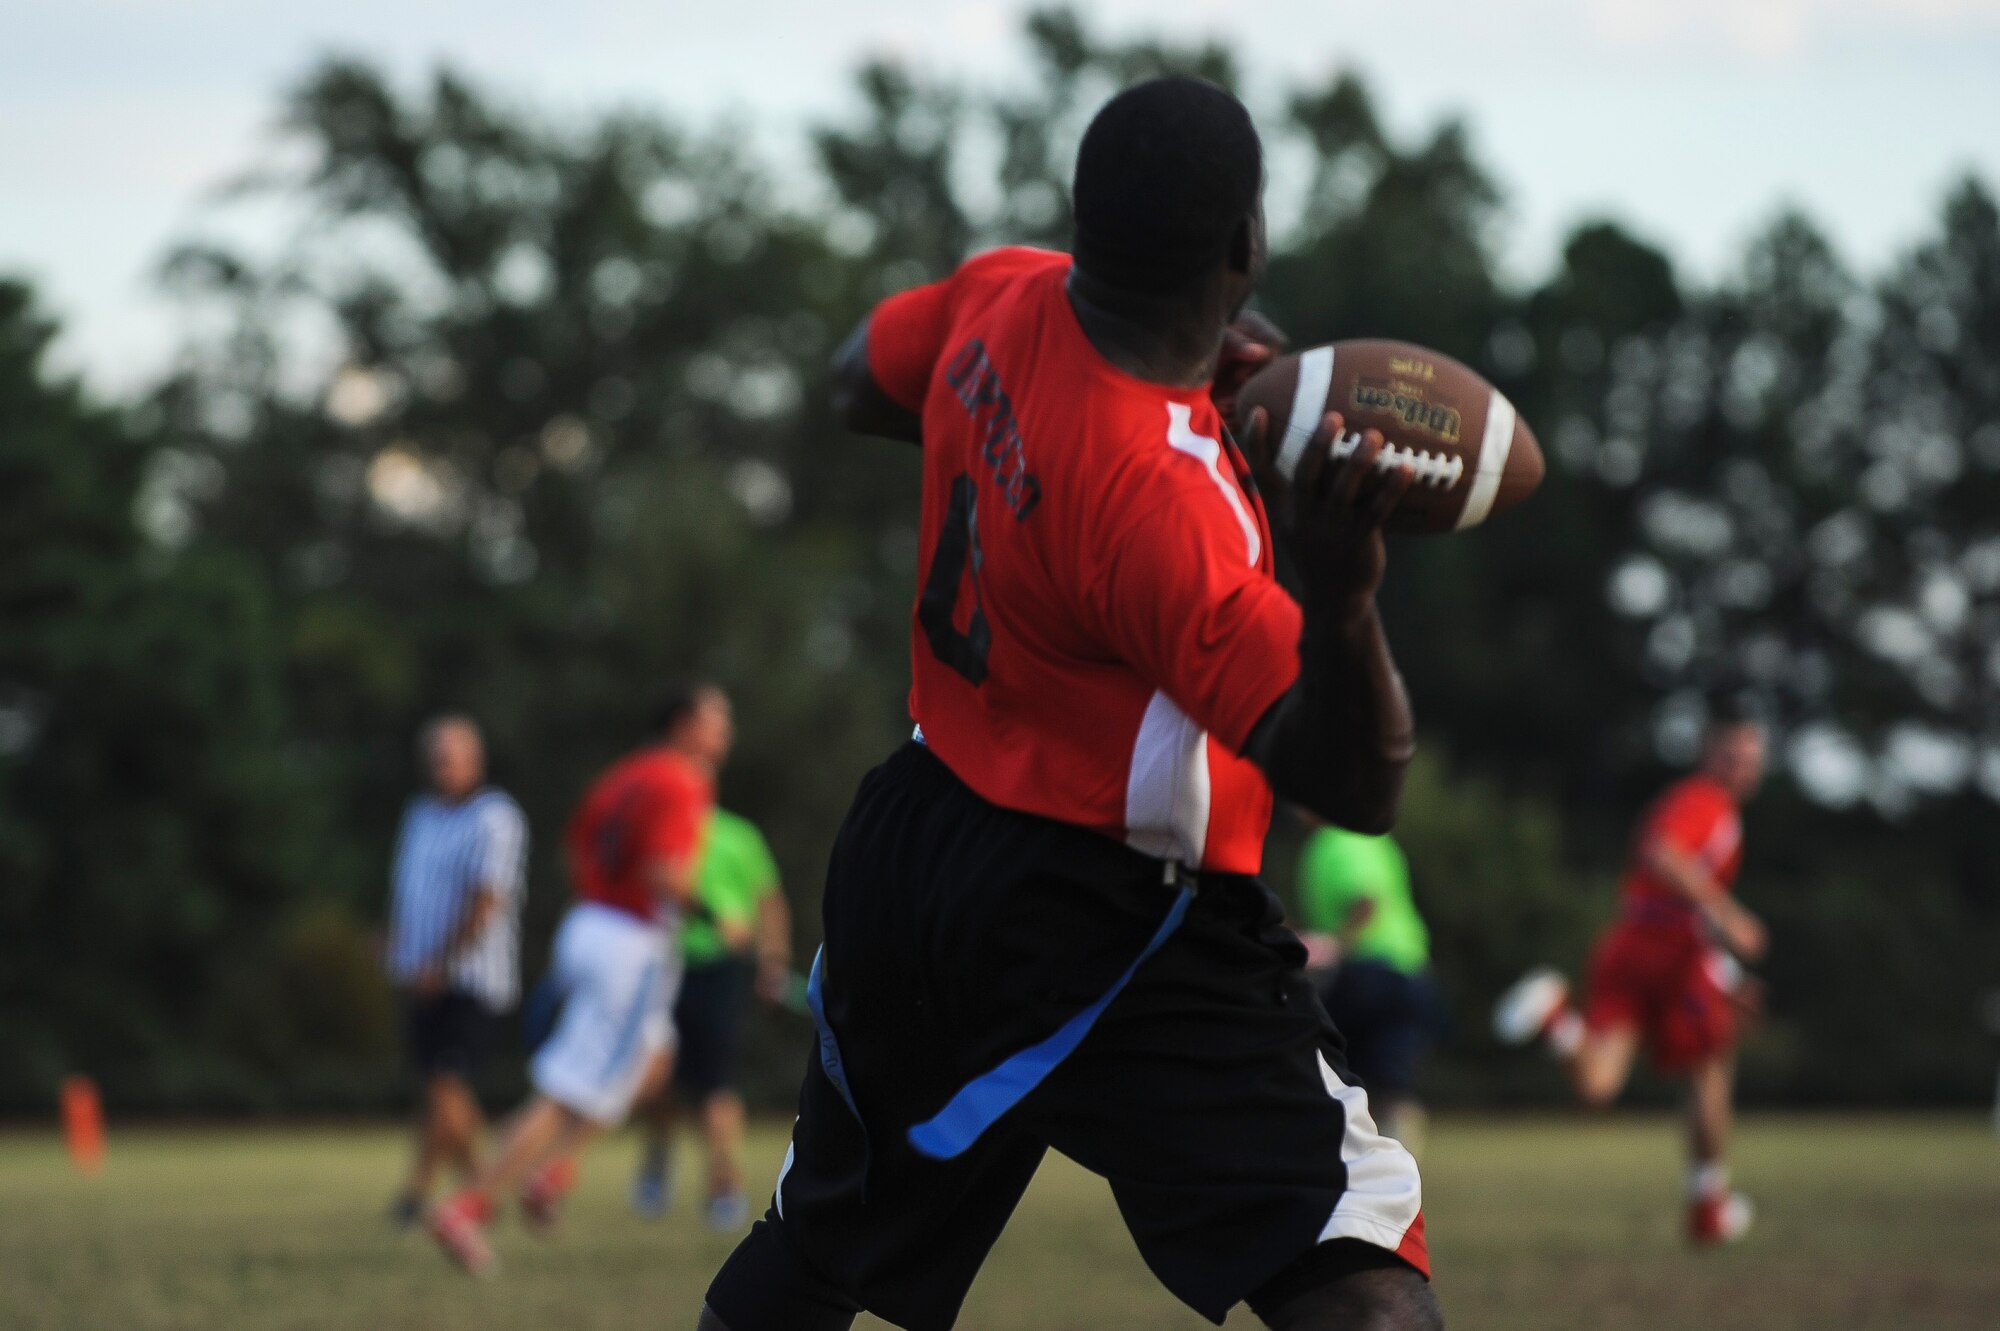 Senior Airman Ernest Opoku quarterback for the 19th Civil Engineer Squadron, rears back to toss a hail mary down the field to end the first half of an intramural flag football game Oct. 9, 2014, at Little Rock Air Force Base, Ark. The 19th CES struggled to maintain possession of the ball, turning it over a total of five times. (U.S. Air Force photo by Airman 1st Class Cliffton Dolezal)